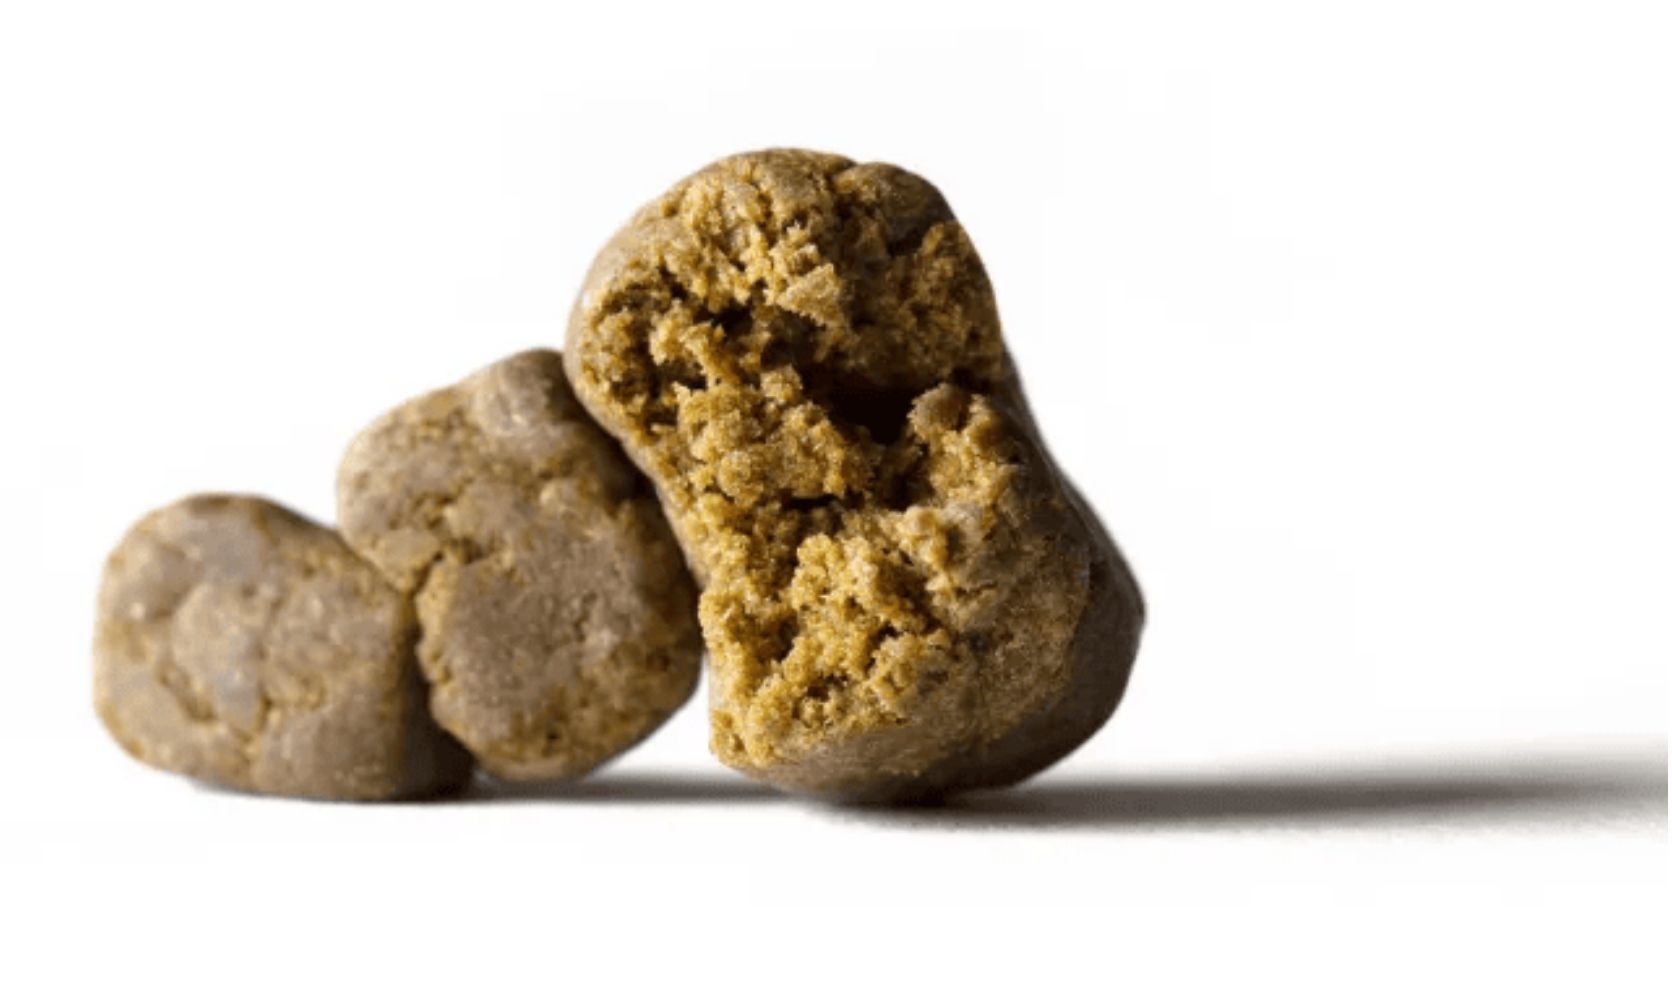 Buy the Best Hash Online in Canada at Our Weed Dispensary